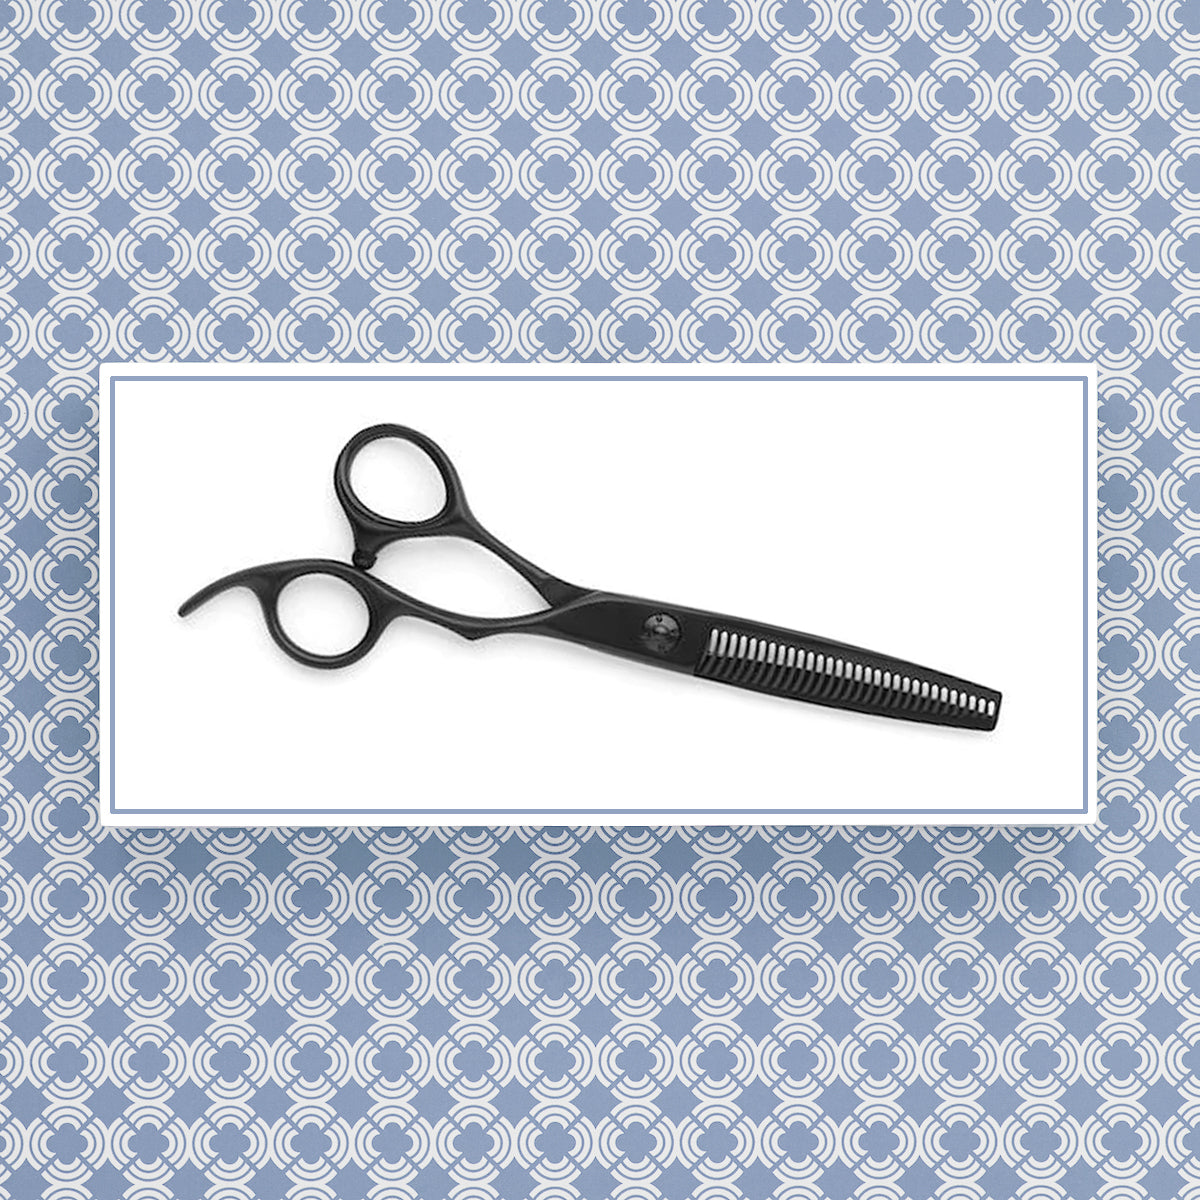 Best Quality Matsui Matte Black Offset Professional Hair Thinning Shears (6748701196354)